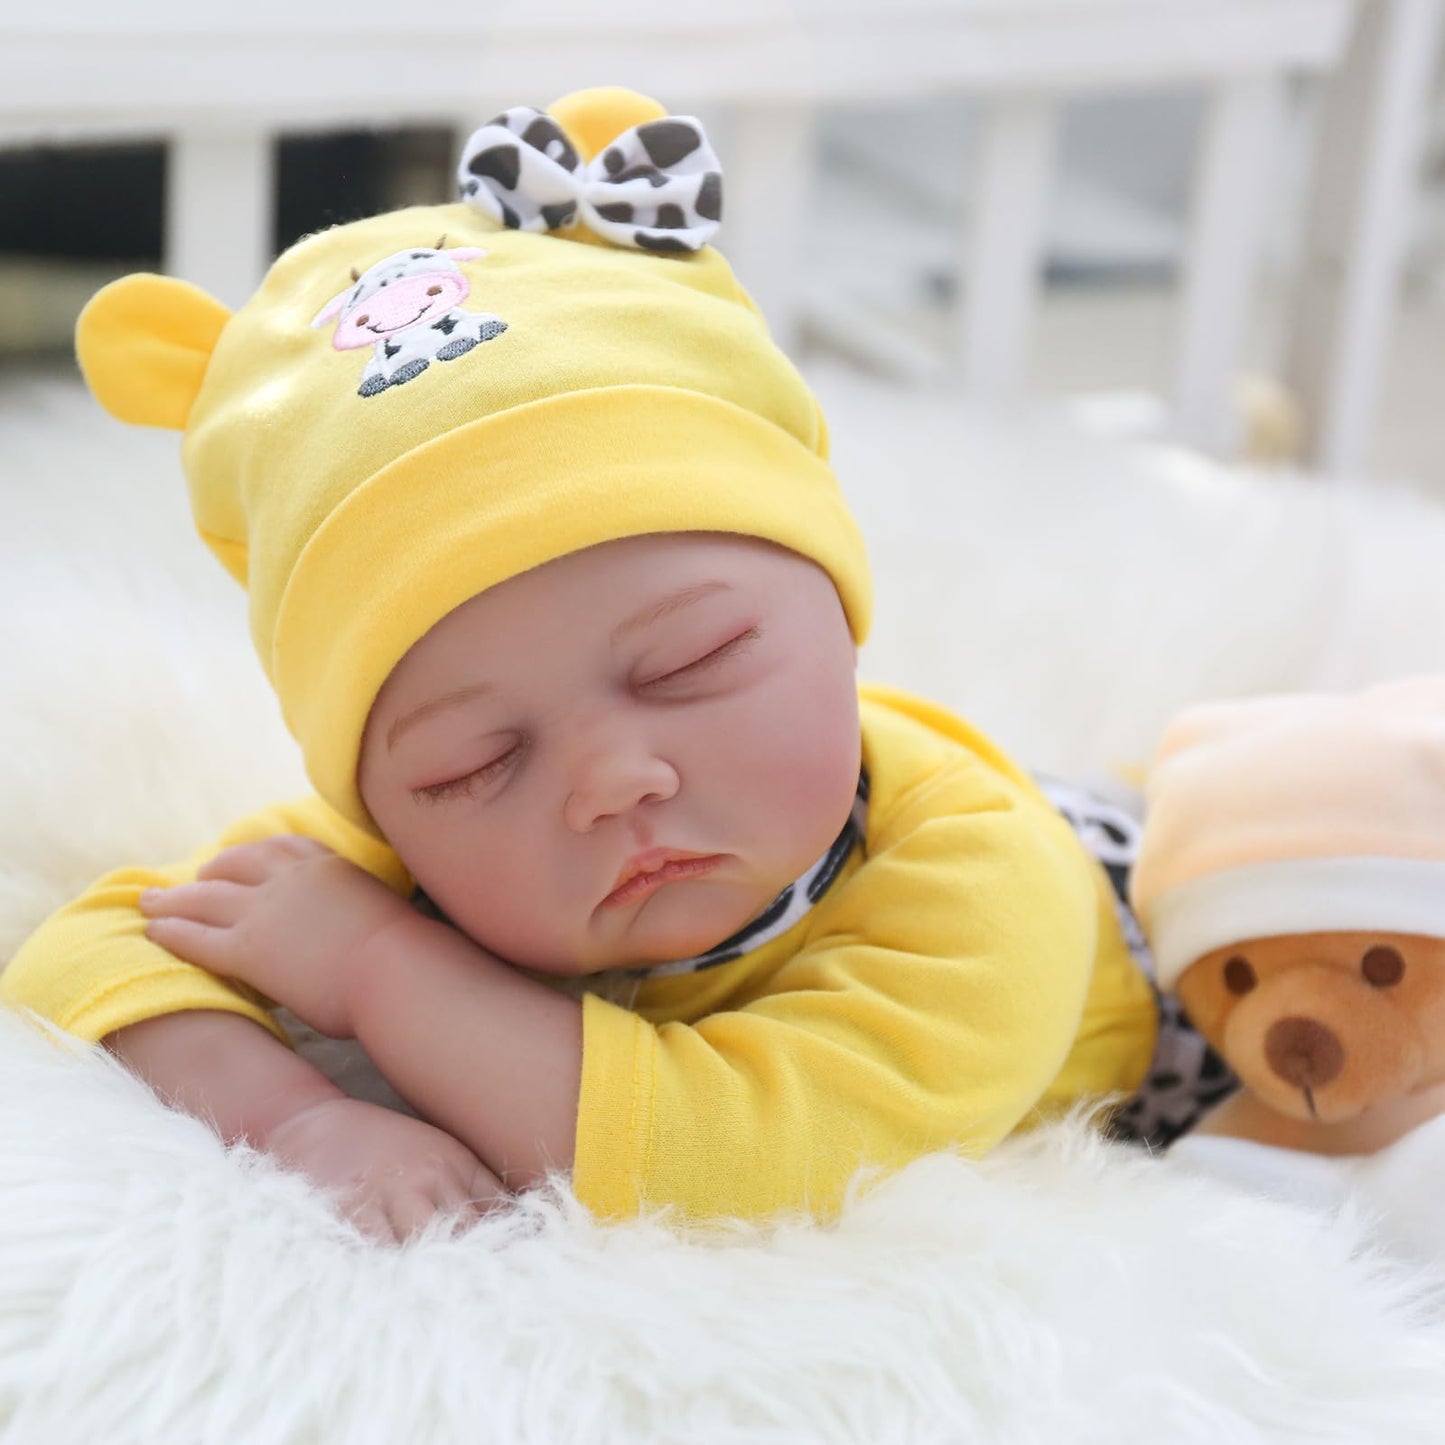 22 Inch Realistic Newborn Baby Dolls Real Life Baby Dolls Gifts/Toys for Collection & Kids Age 3+